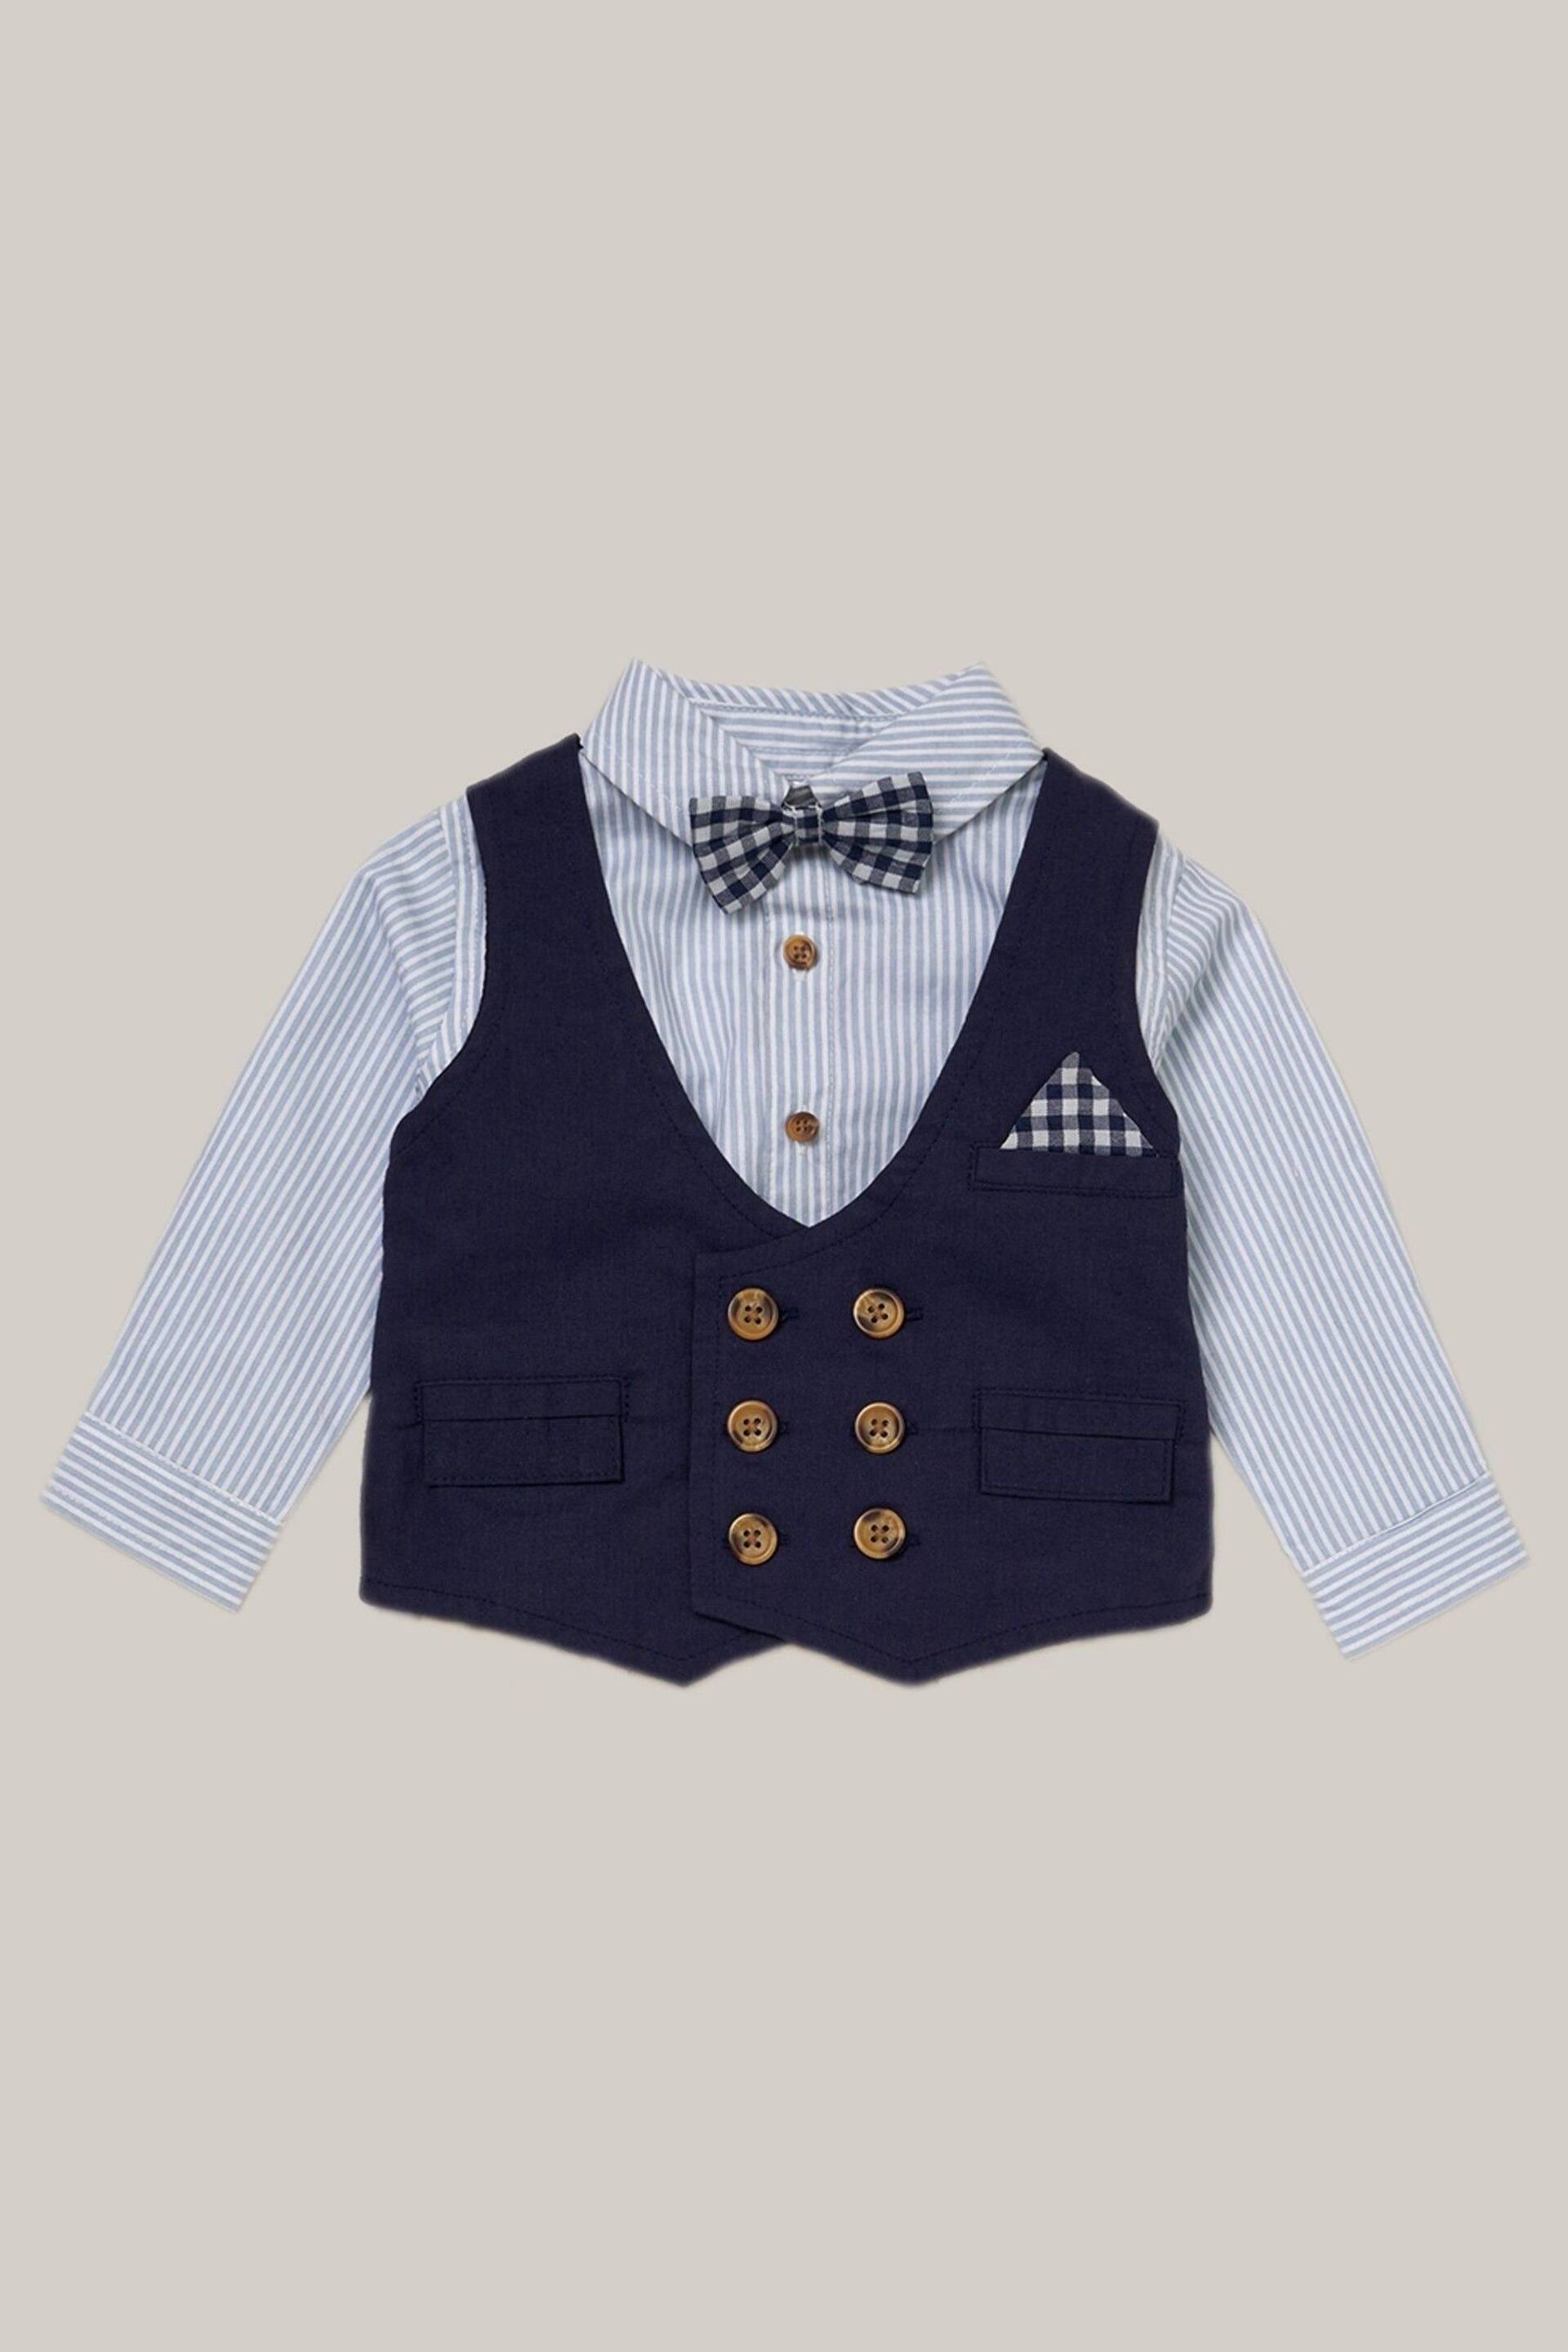 Little Gent Mock Shirt and Waistcoat Cotton 3-Piece Baby Gift Set - Image 2 of 4